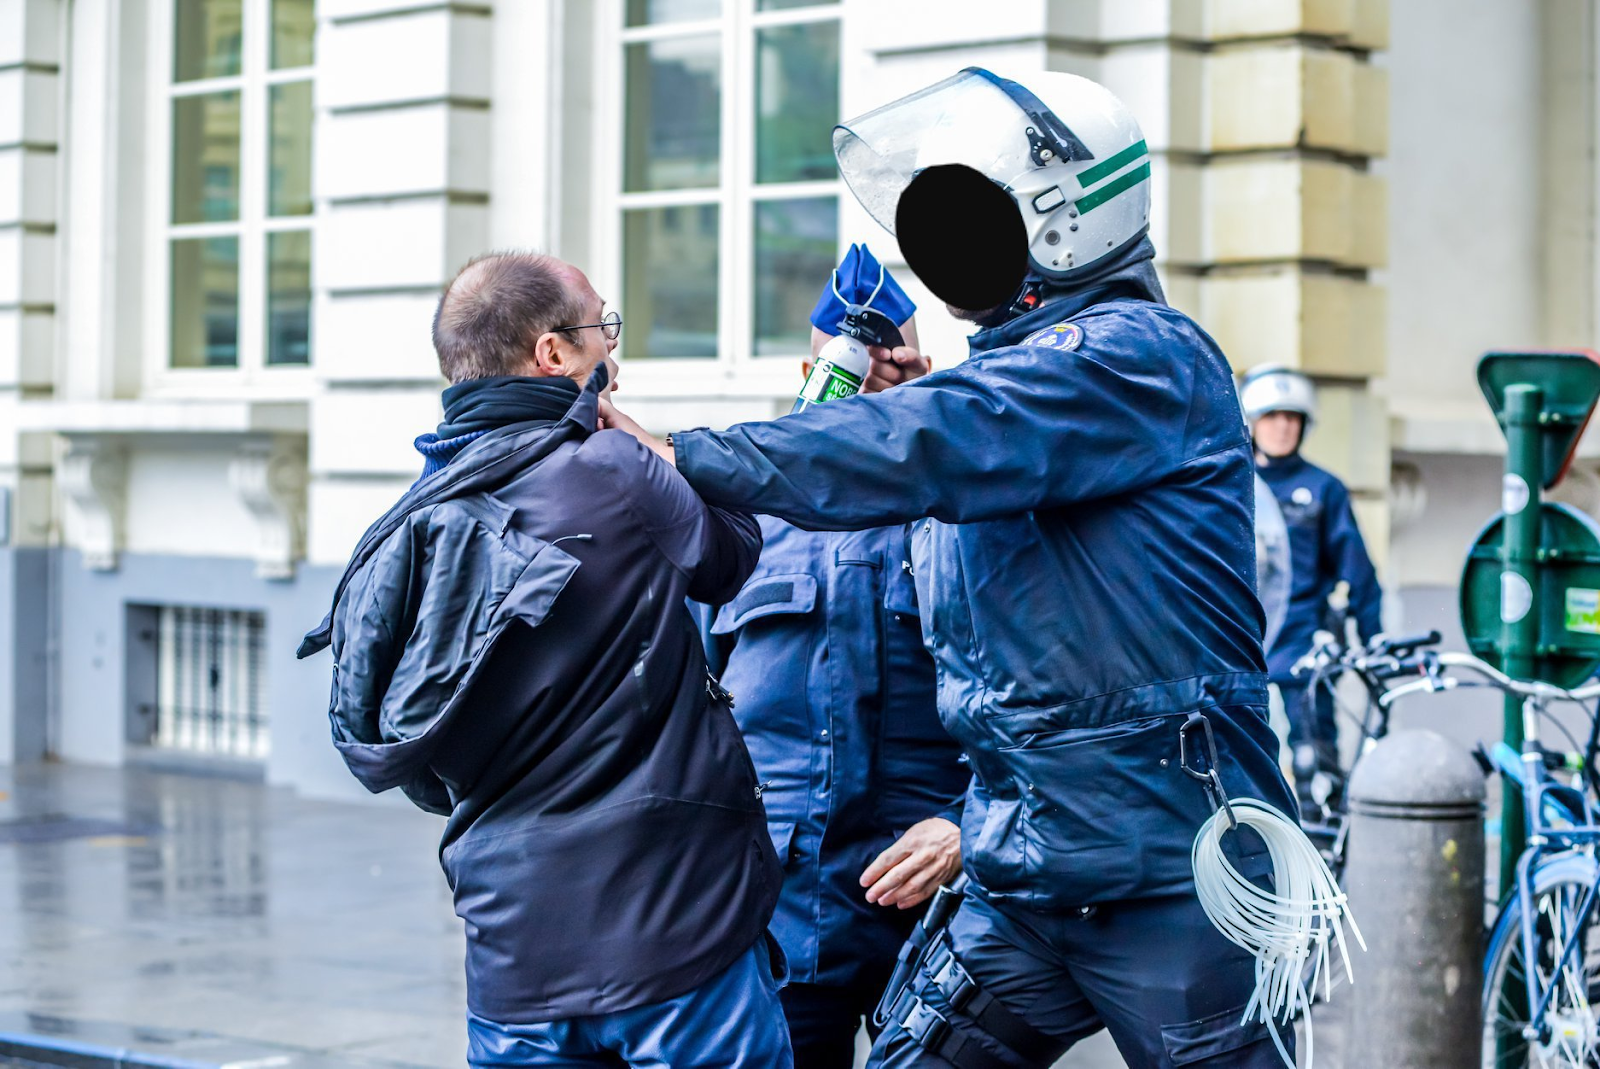 A rebel being held by the neck by a police officer. In his other hand, the police officer has a bottle of pepper spray which he is pointing at the activist.